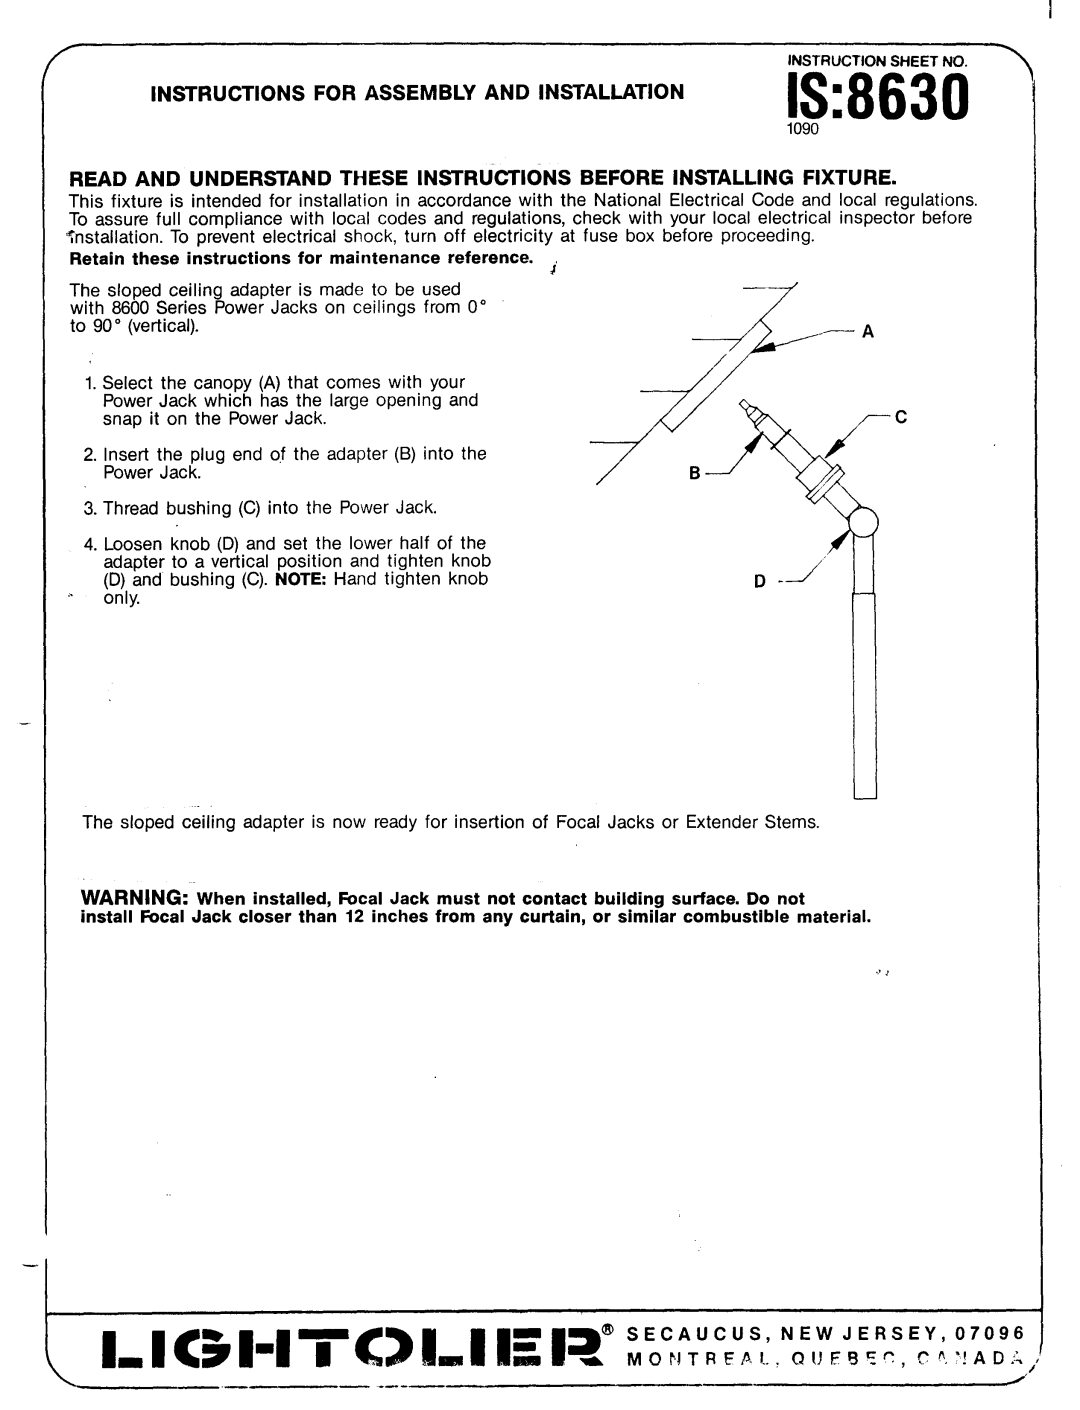 Lightolier 8630 instruction sheet Is, Instructionsfor Assembly And Installation 